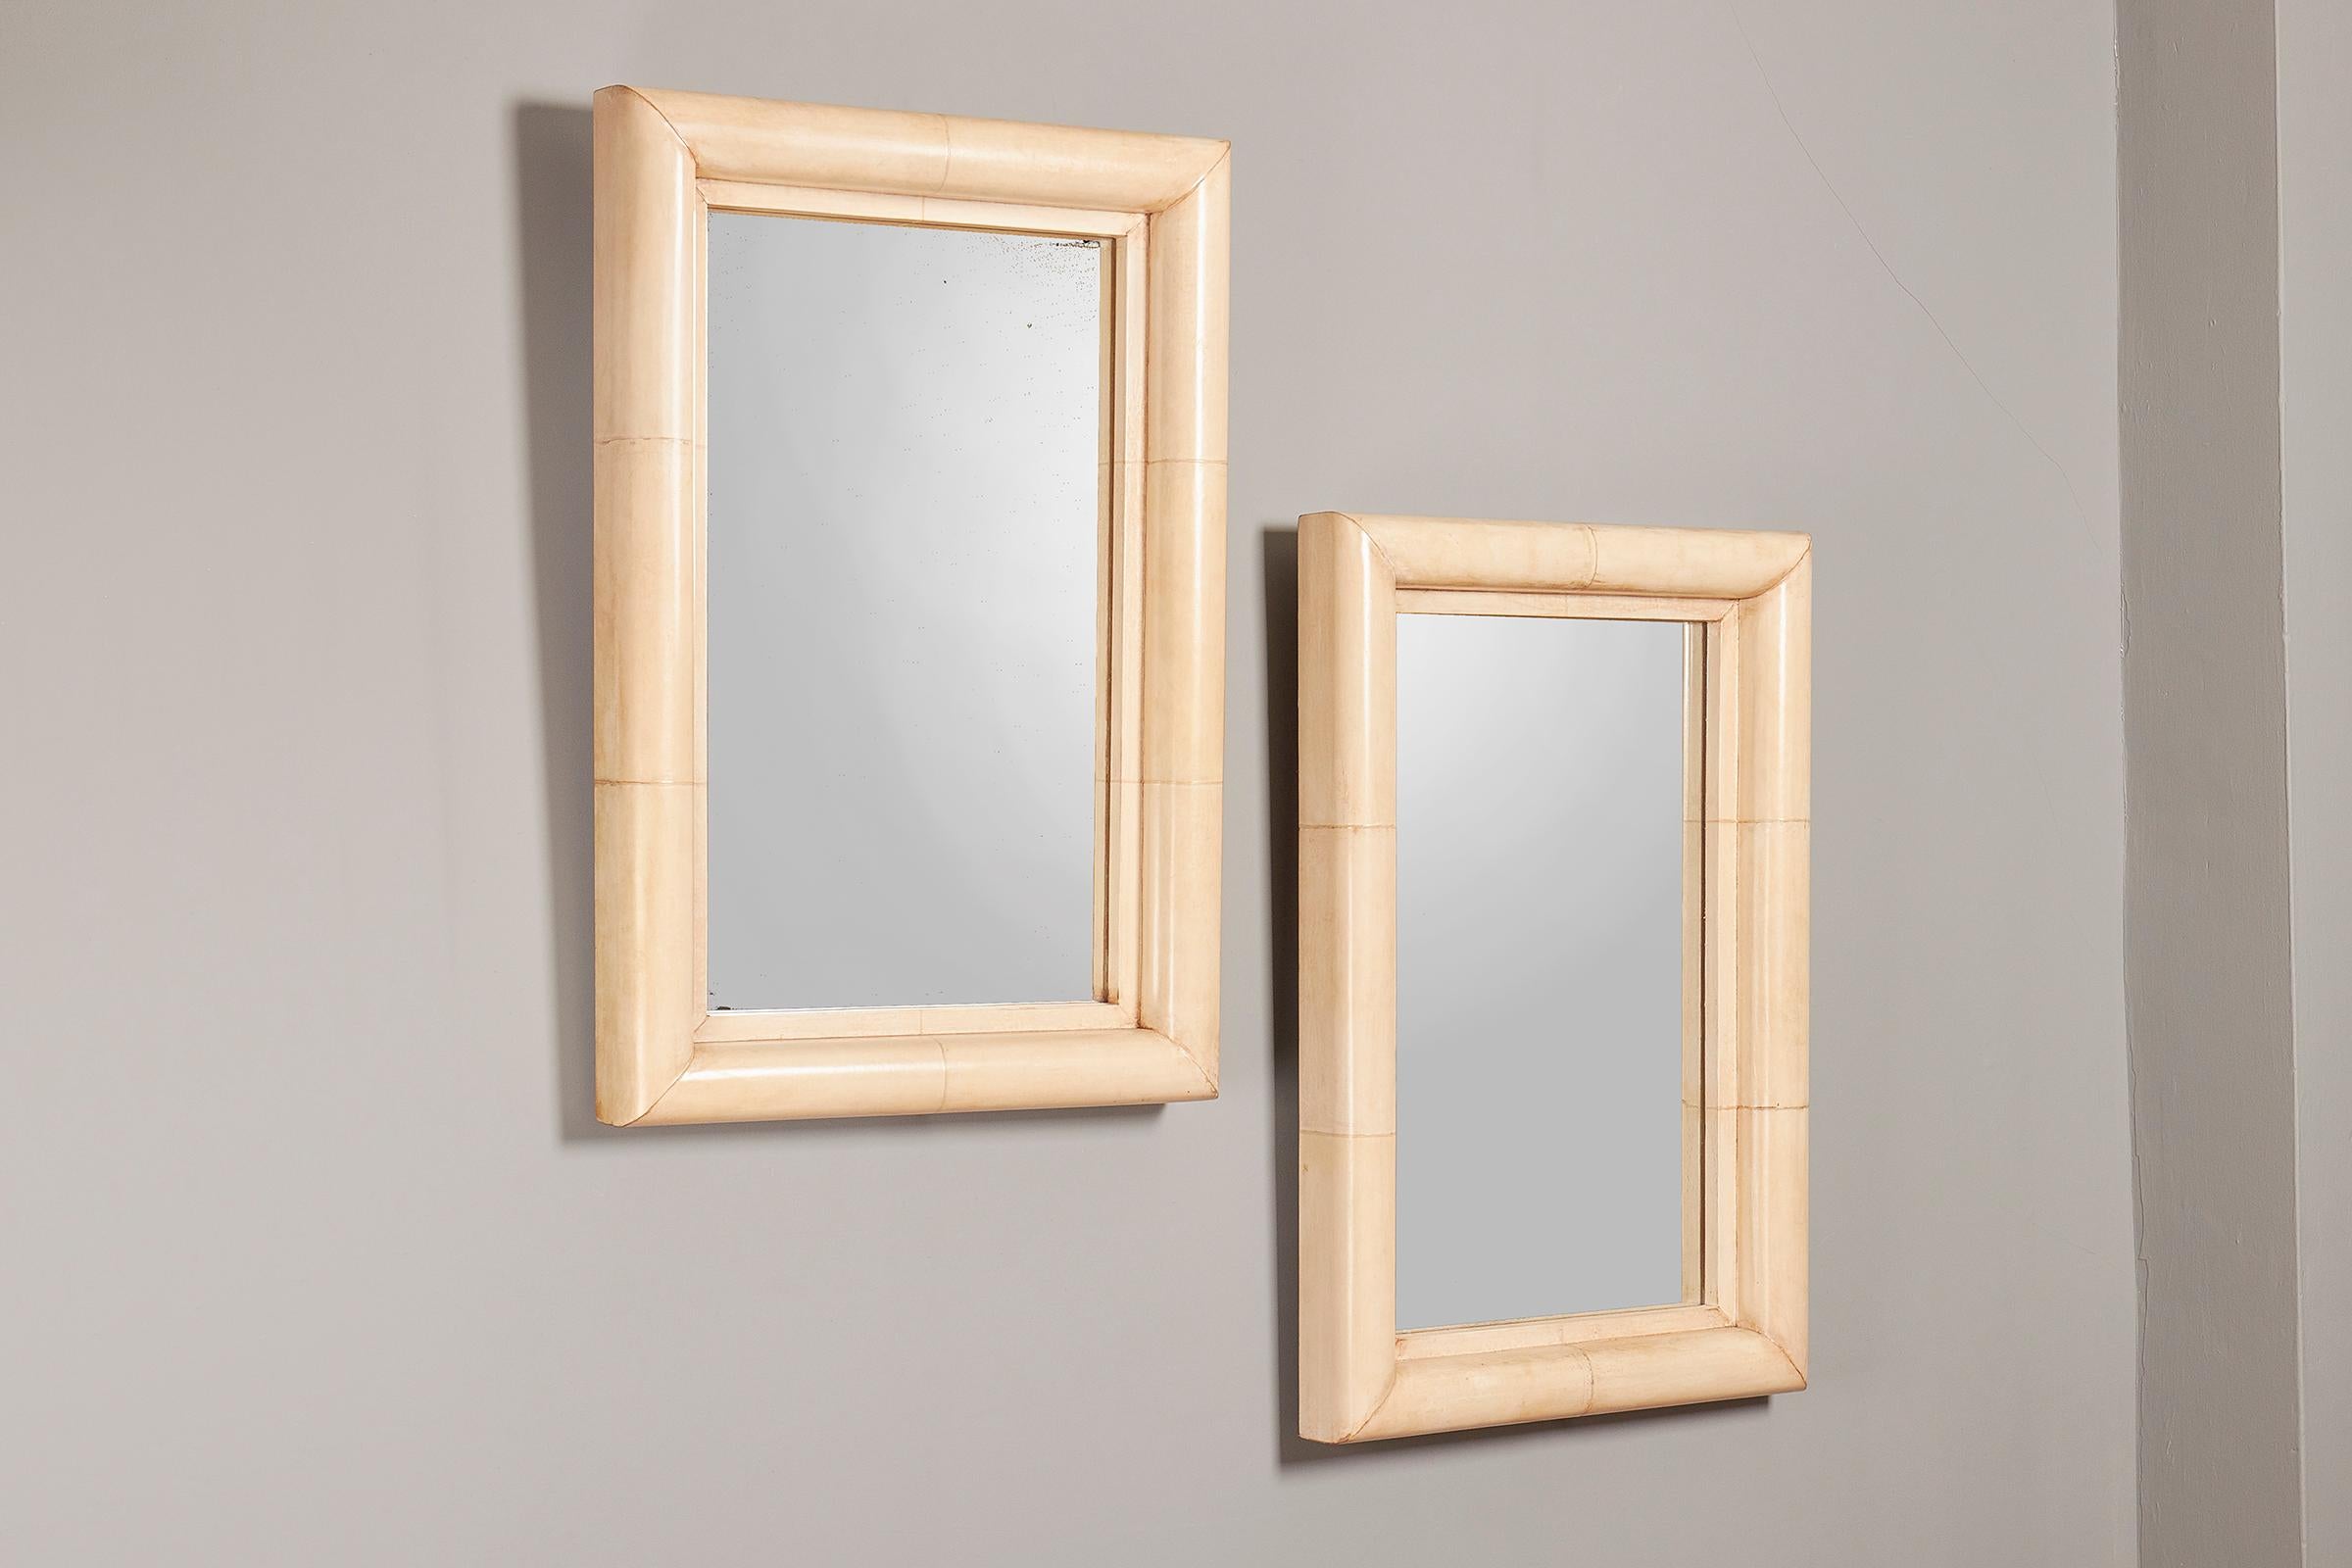 A pair of French Art Deco style parchment covered wood mirrors, circa 1940, ivory colored, rectangular, with cushion frames.